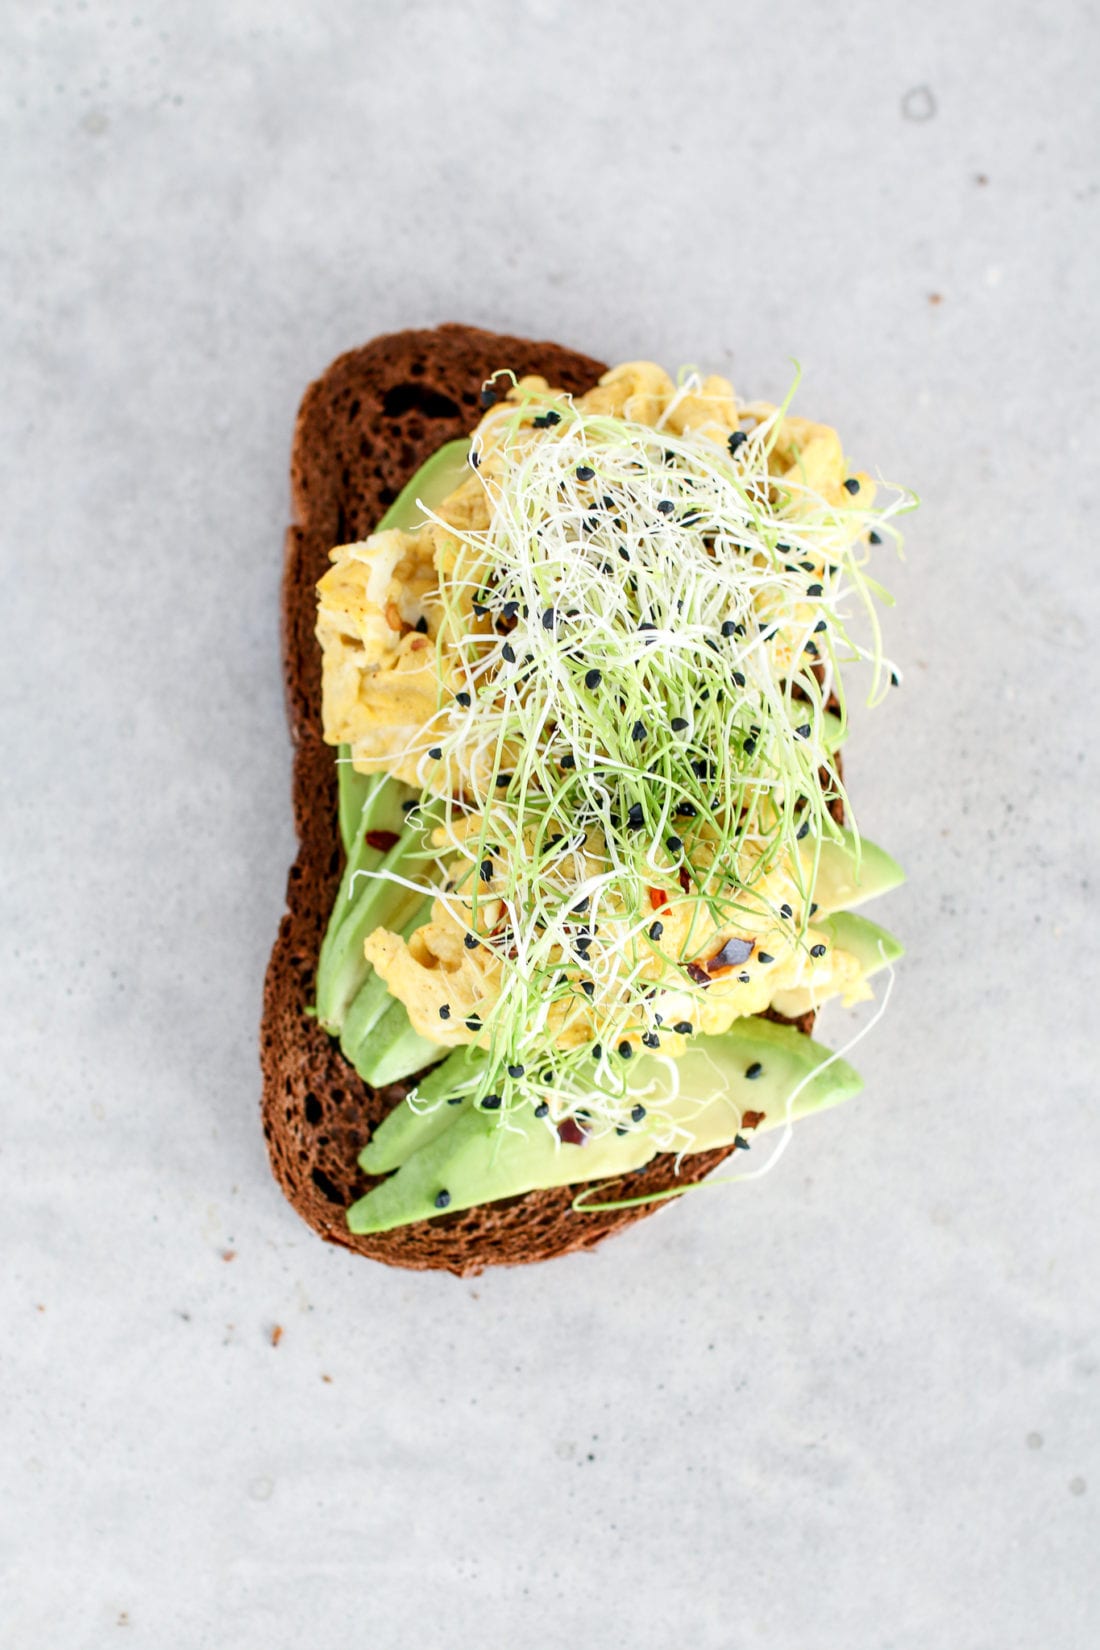 10 healthy and easy toast creations from avocado to New York style, made with simple mouthwatering ingredients, perfect for breakfast, lunch and even dinner!